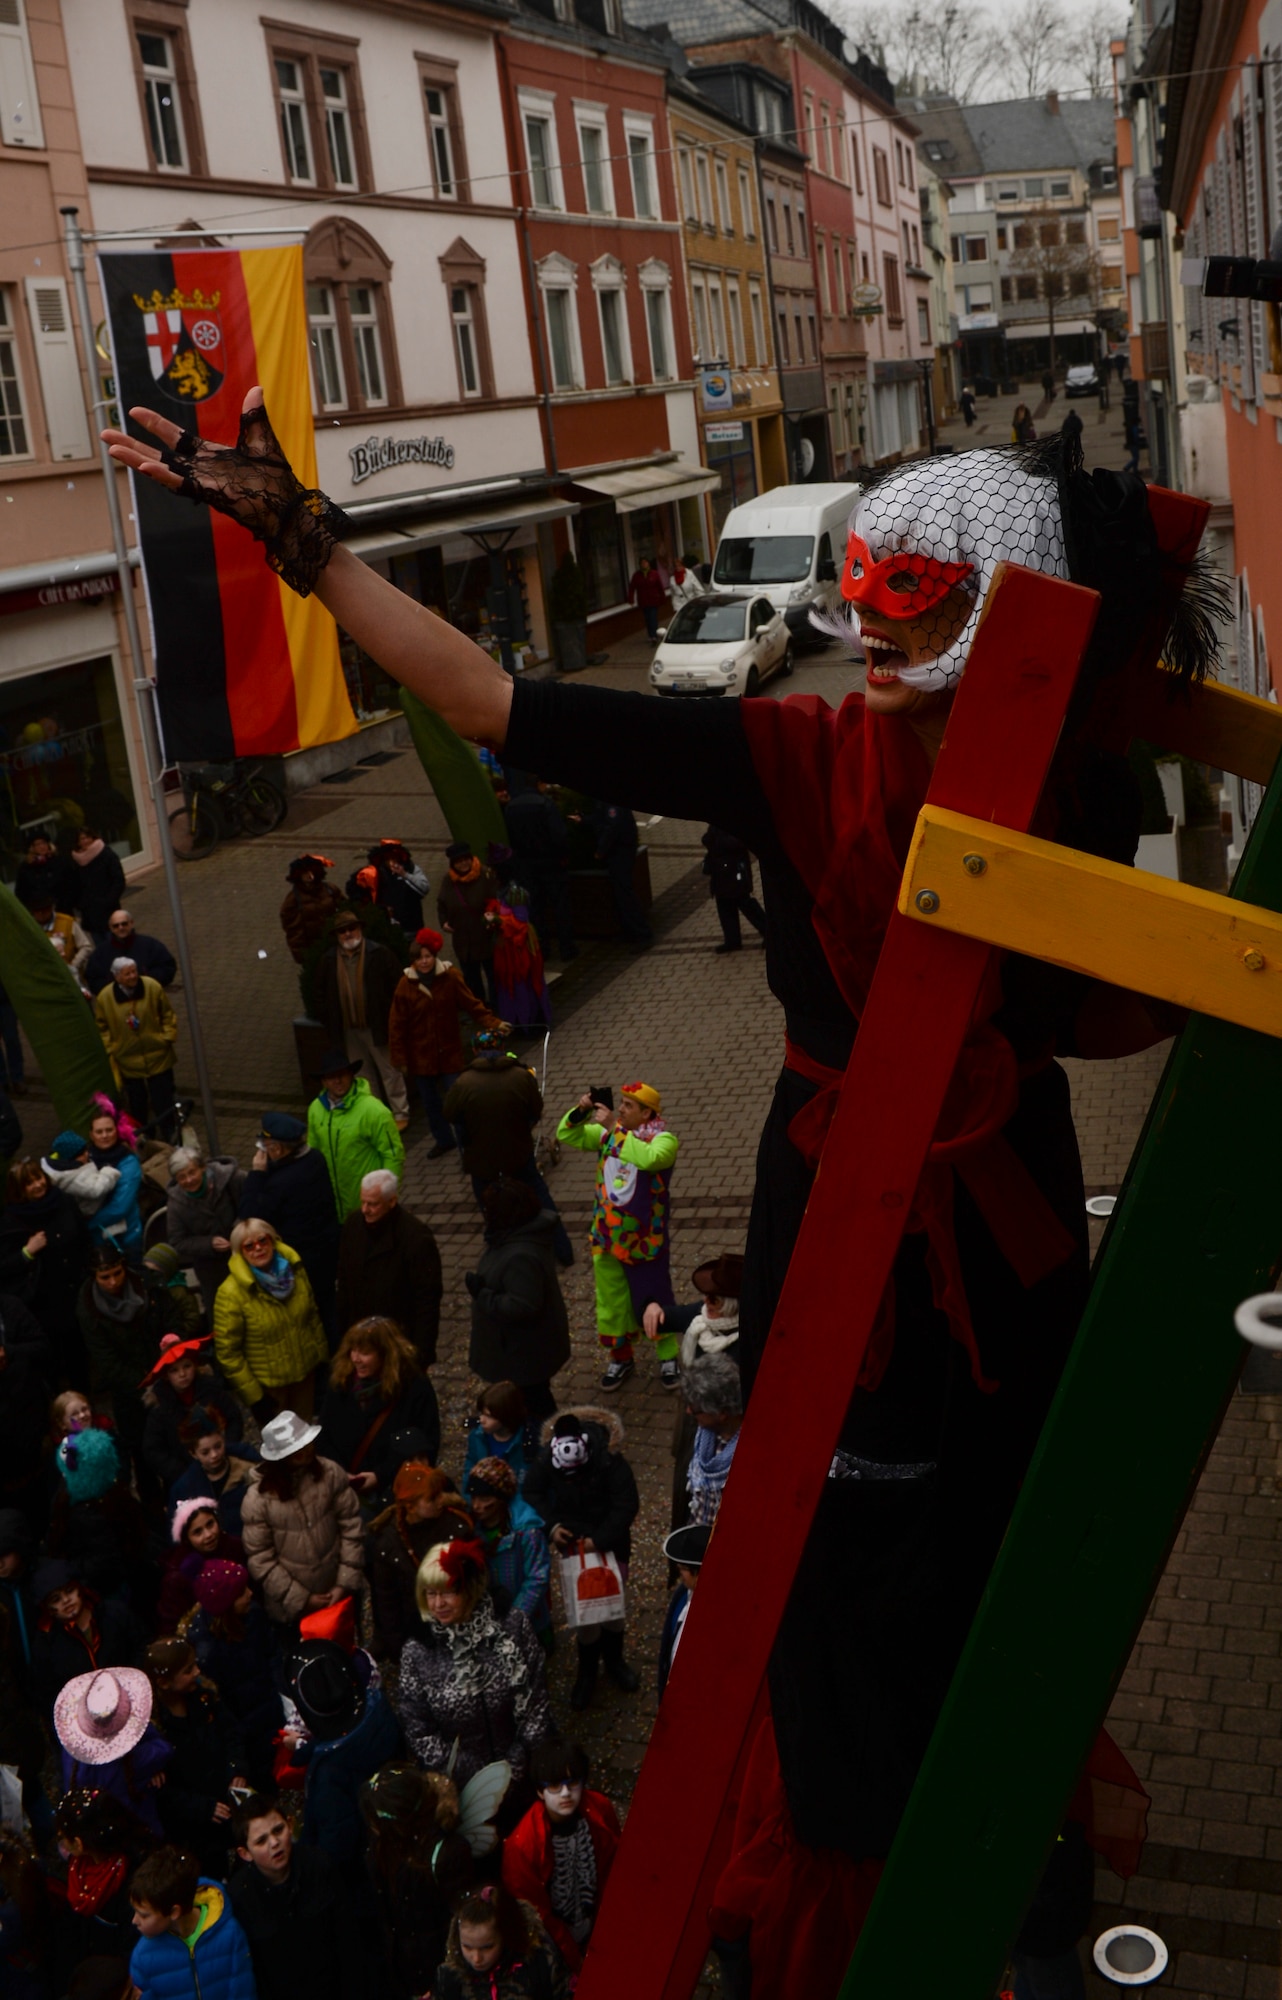 A citizen of Wittlich, Germany, throws confetti off of a ladder while climbing up to a window of city hall during a Fasching celebration in Wittlich, Germany, Feb. 12, 2015. The celebration included a tradition of female citizens storming the city hall to seize control of the community for the day. (U.S. Air Force Photo by Staff Sgt. Joe W. McFadden/Released)
 
